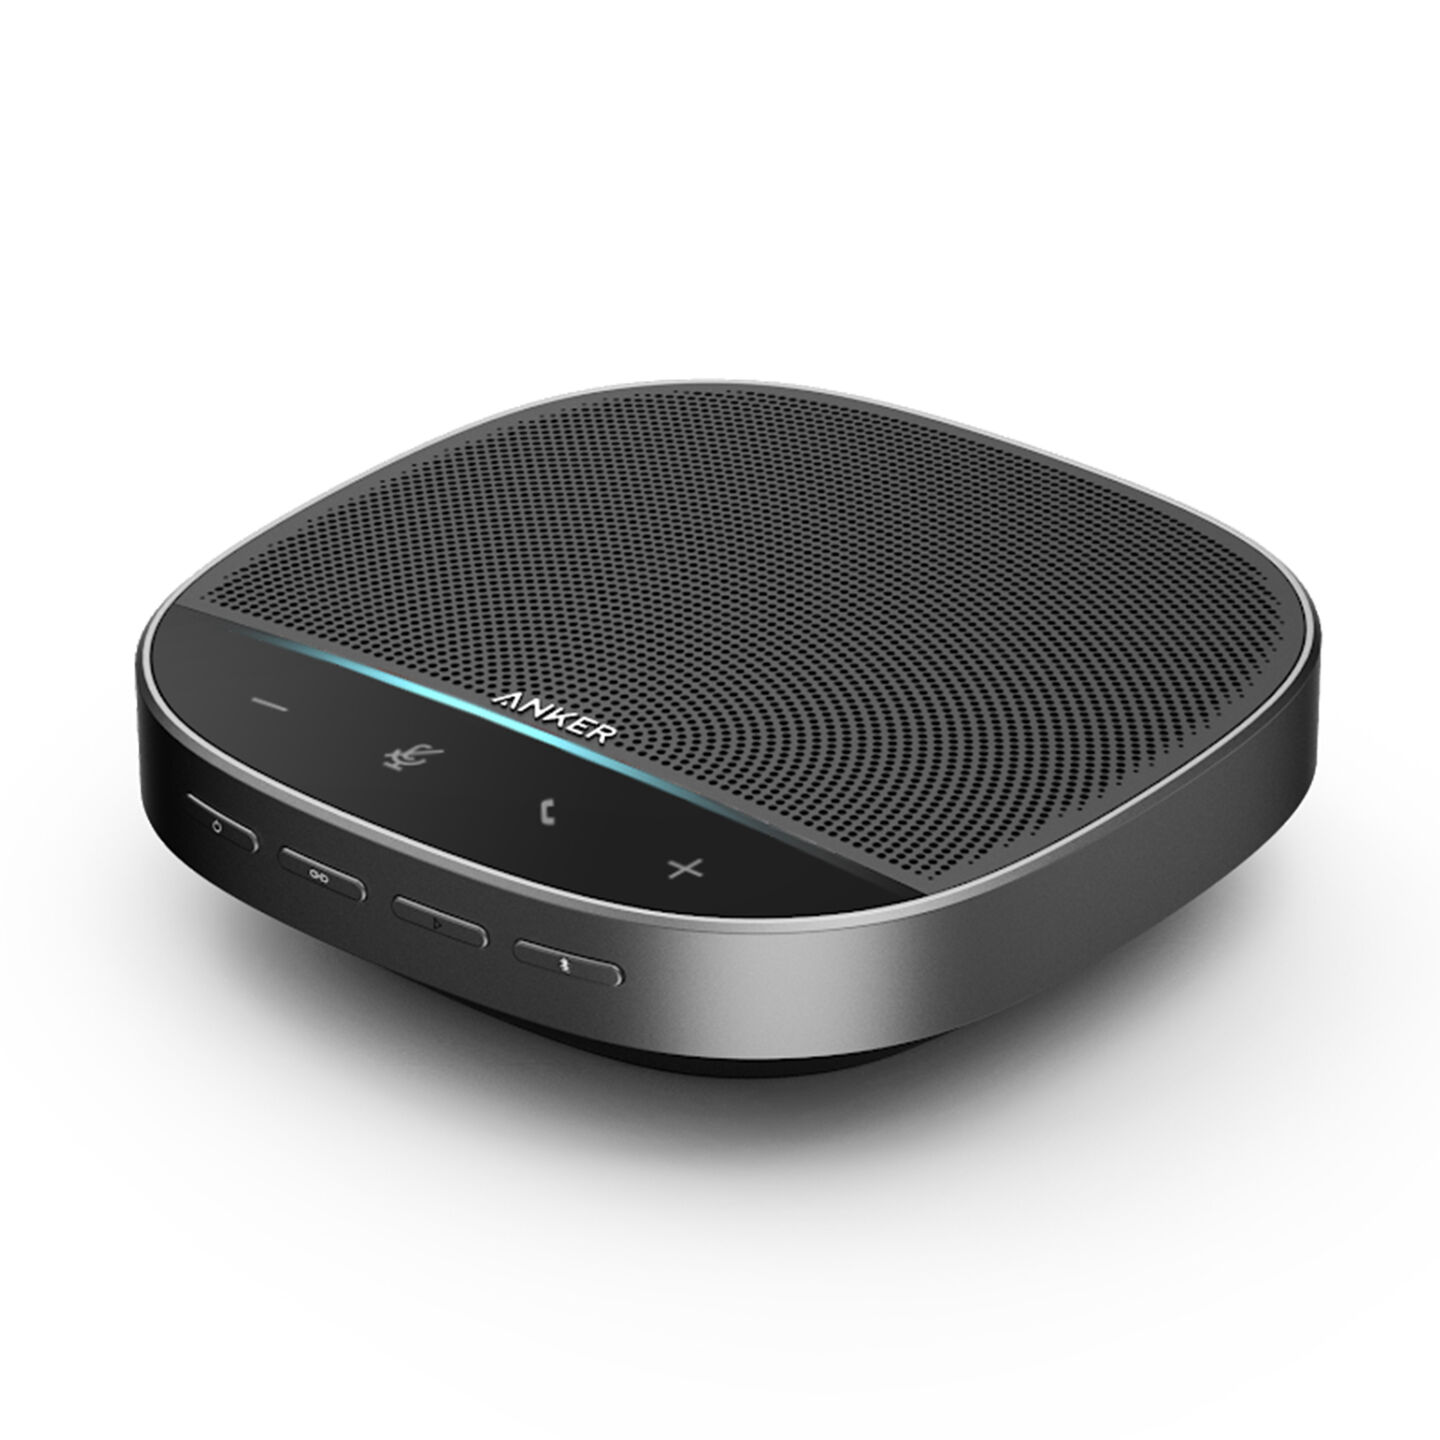 Tech review: Anker PowerConf can pick up every voice around a